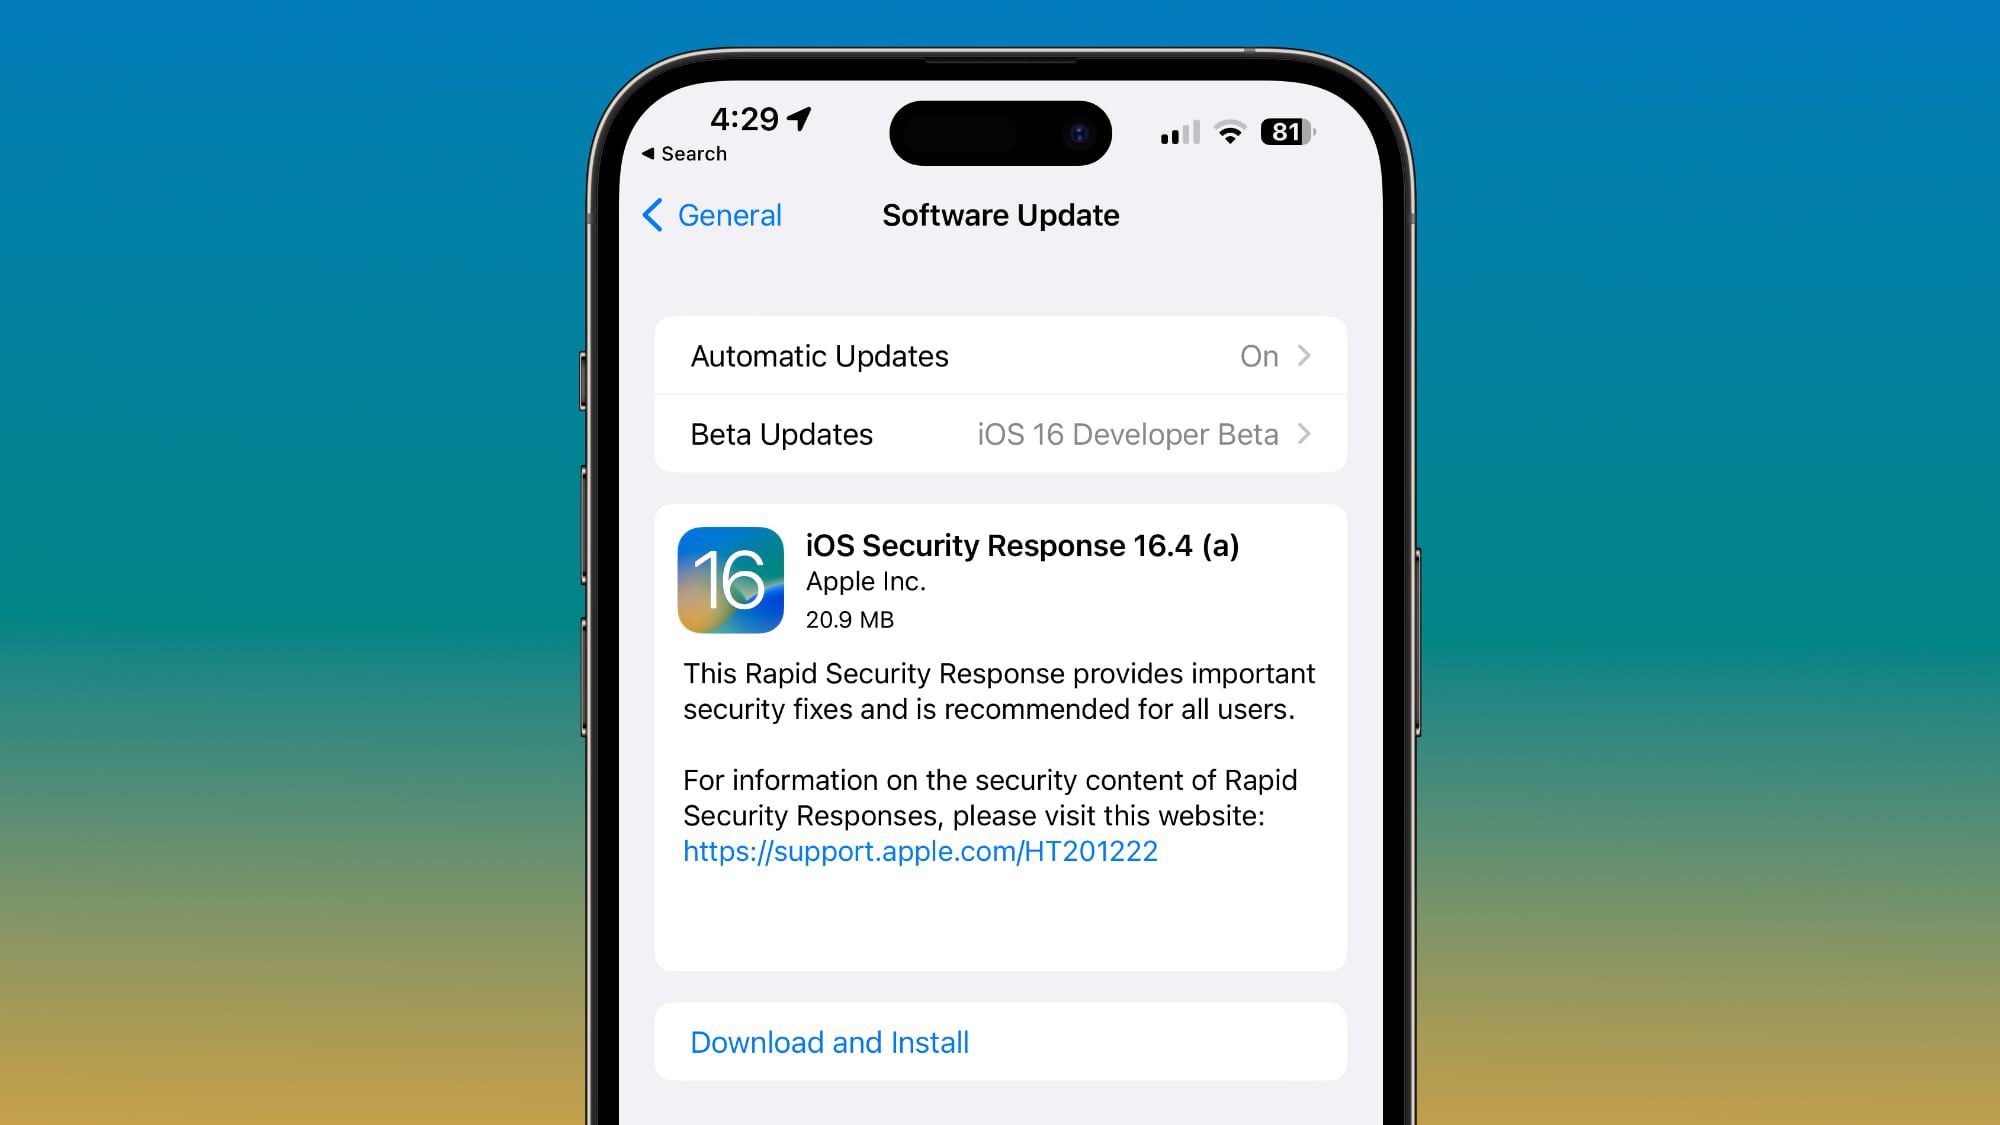 Apple Releases Rapid Security Response Update for iOS 16.4 Beta Users